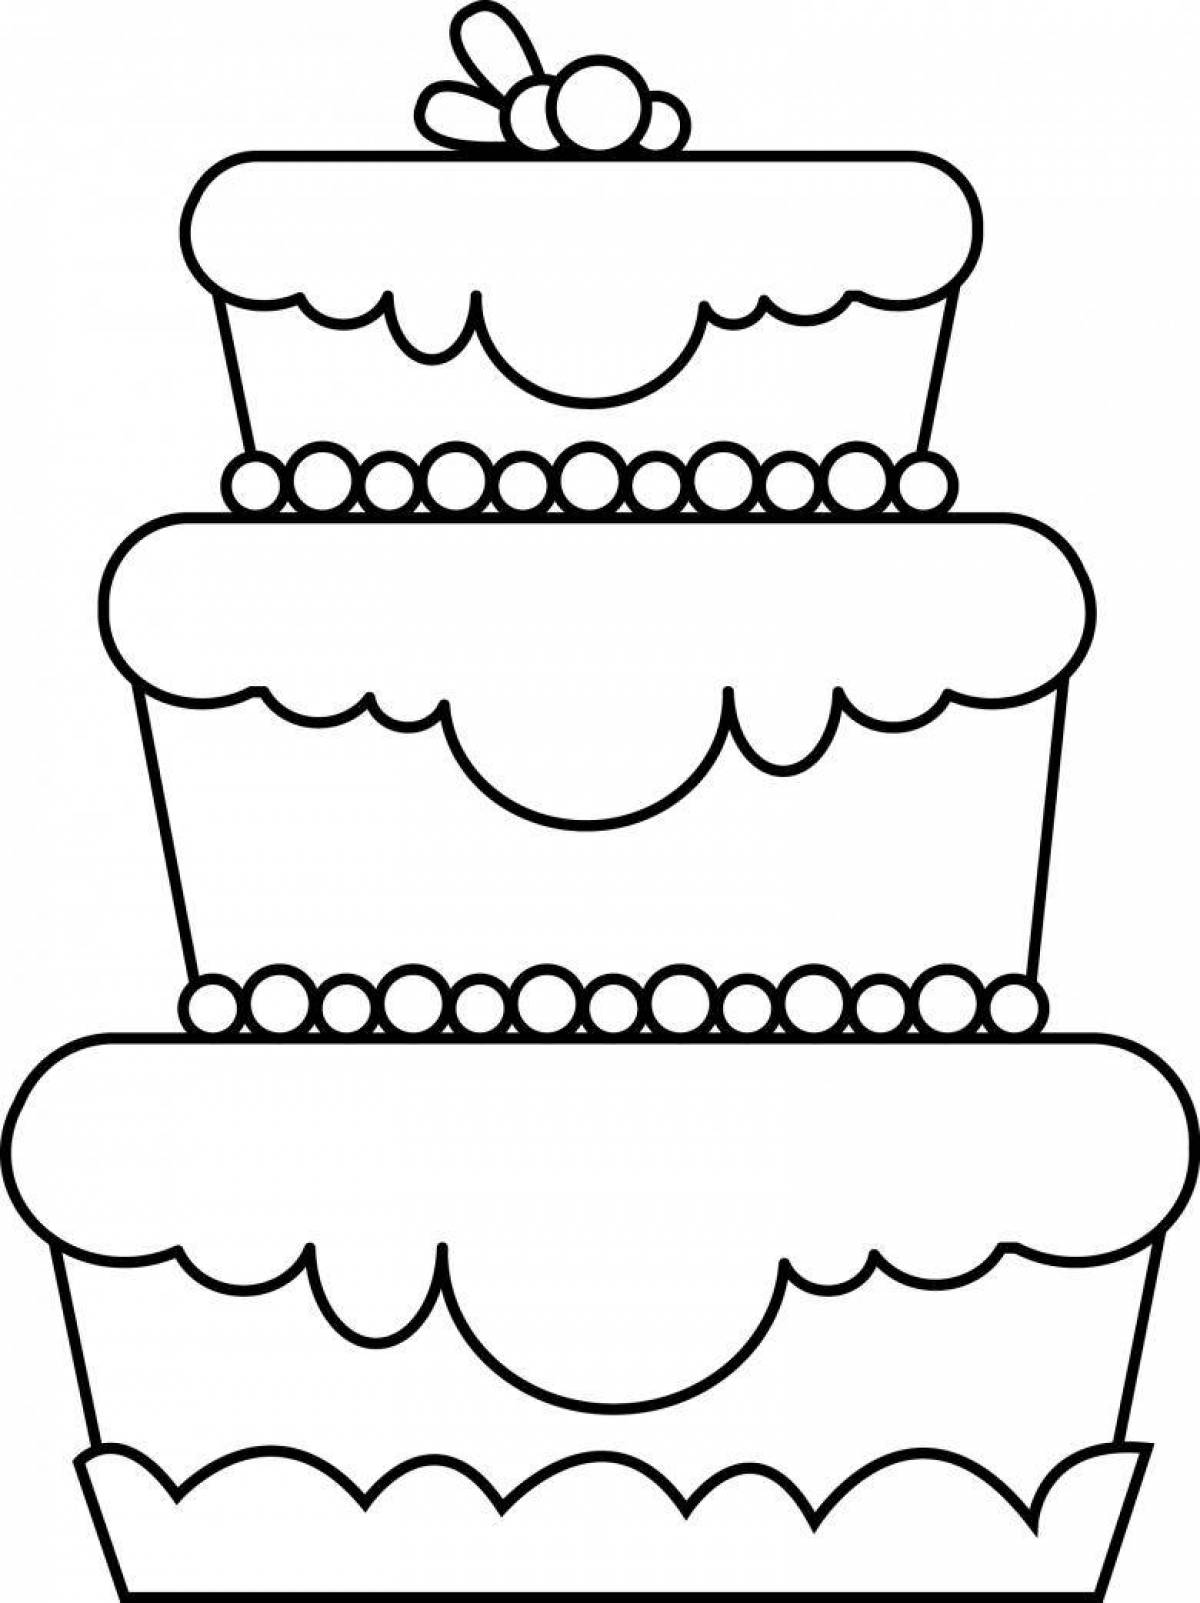 Fancy beautiful cake coloring page